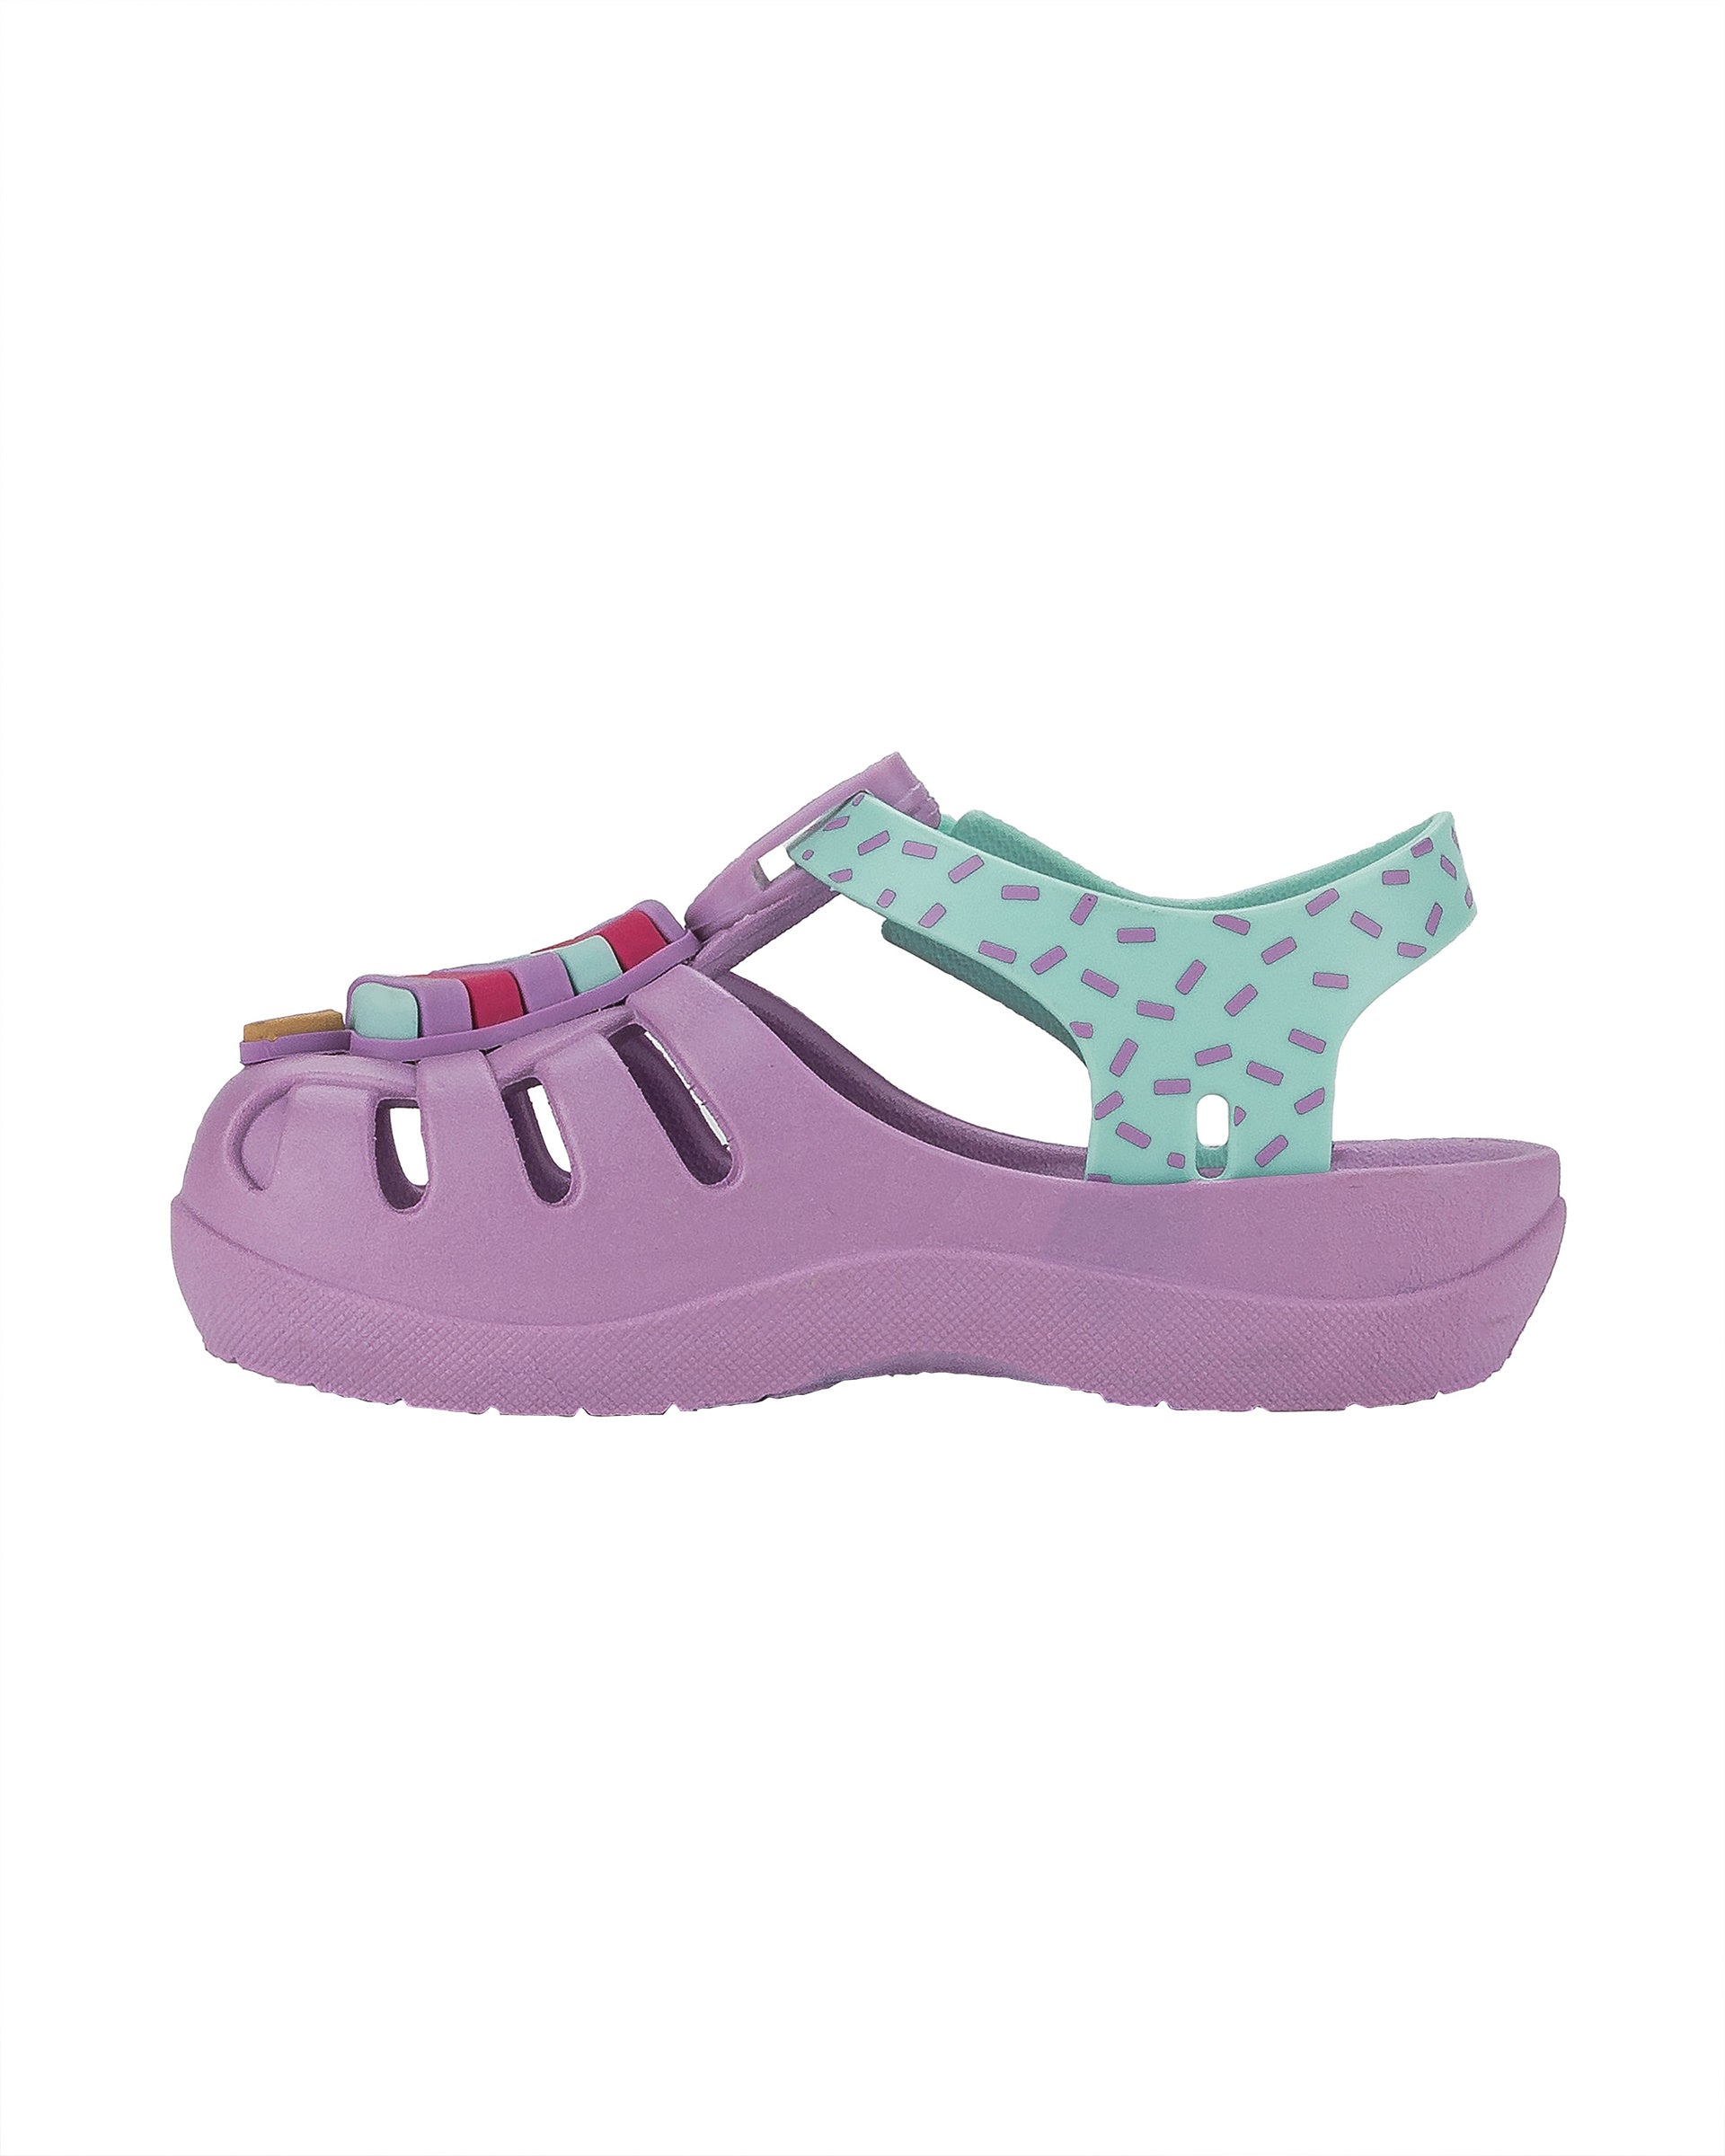 Inner side view of a purple and green Ipanema Summer baby fisherman sandal with popsicle on the upper.